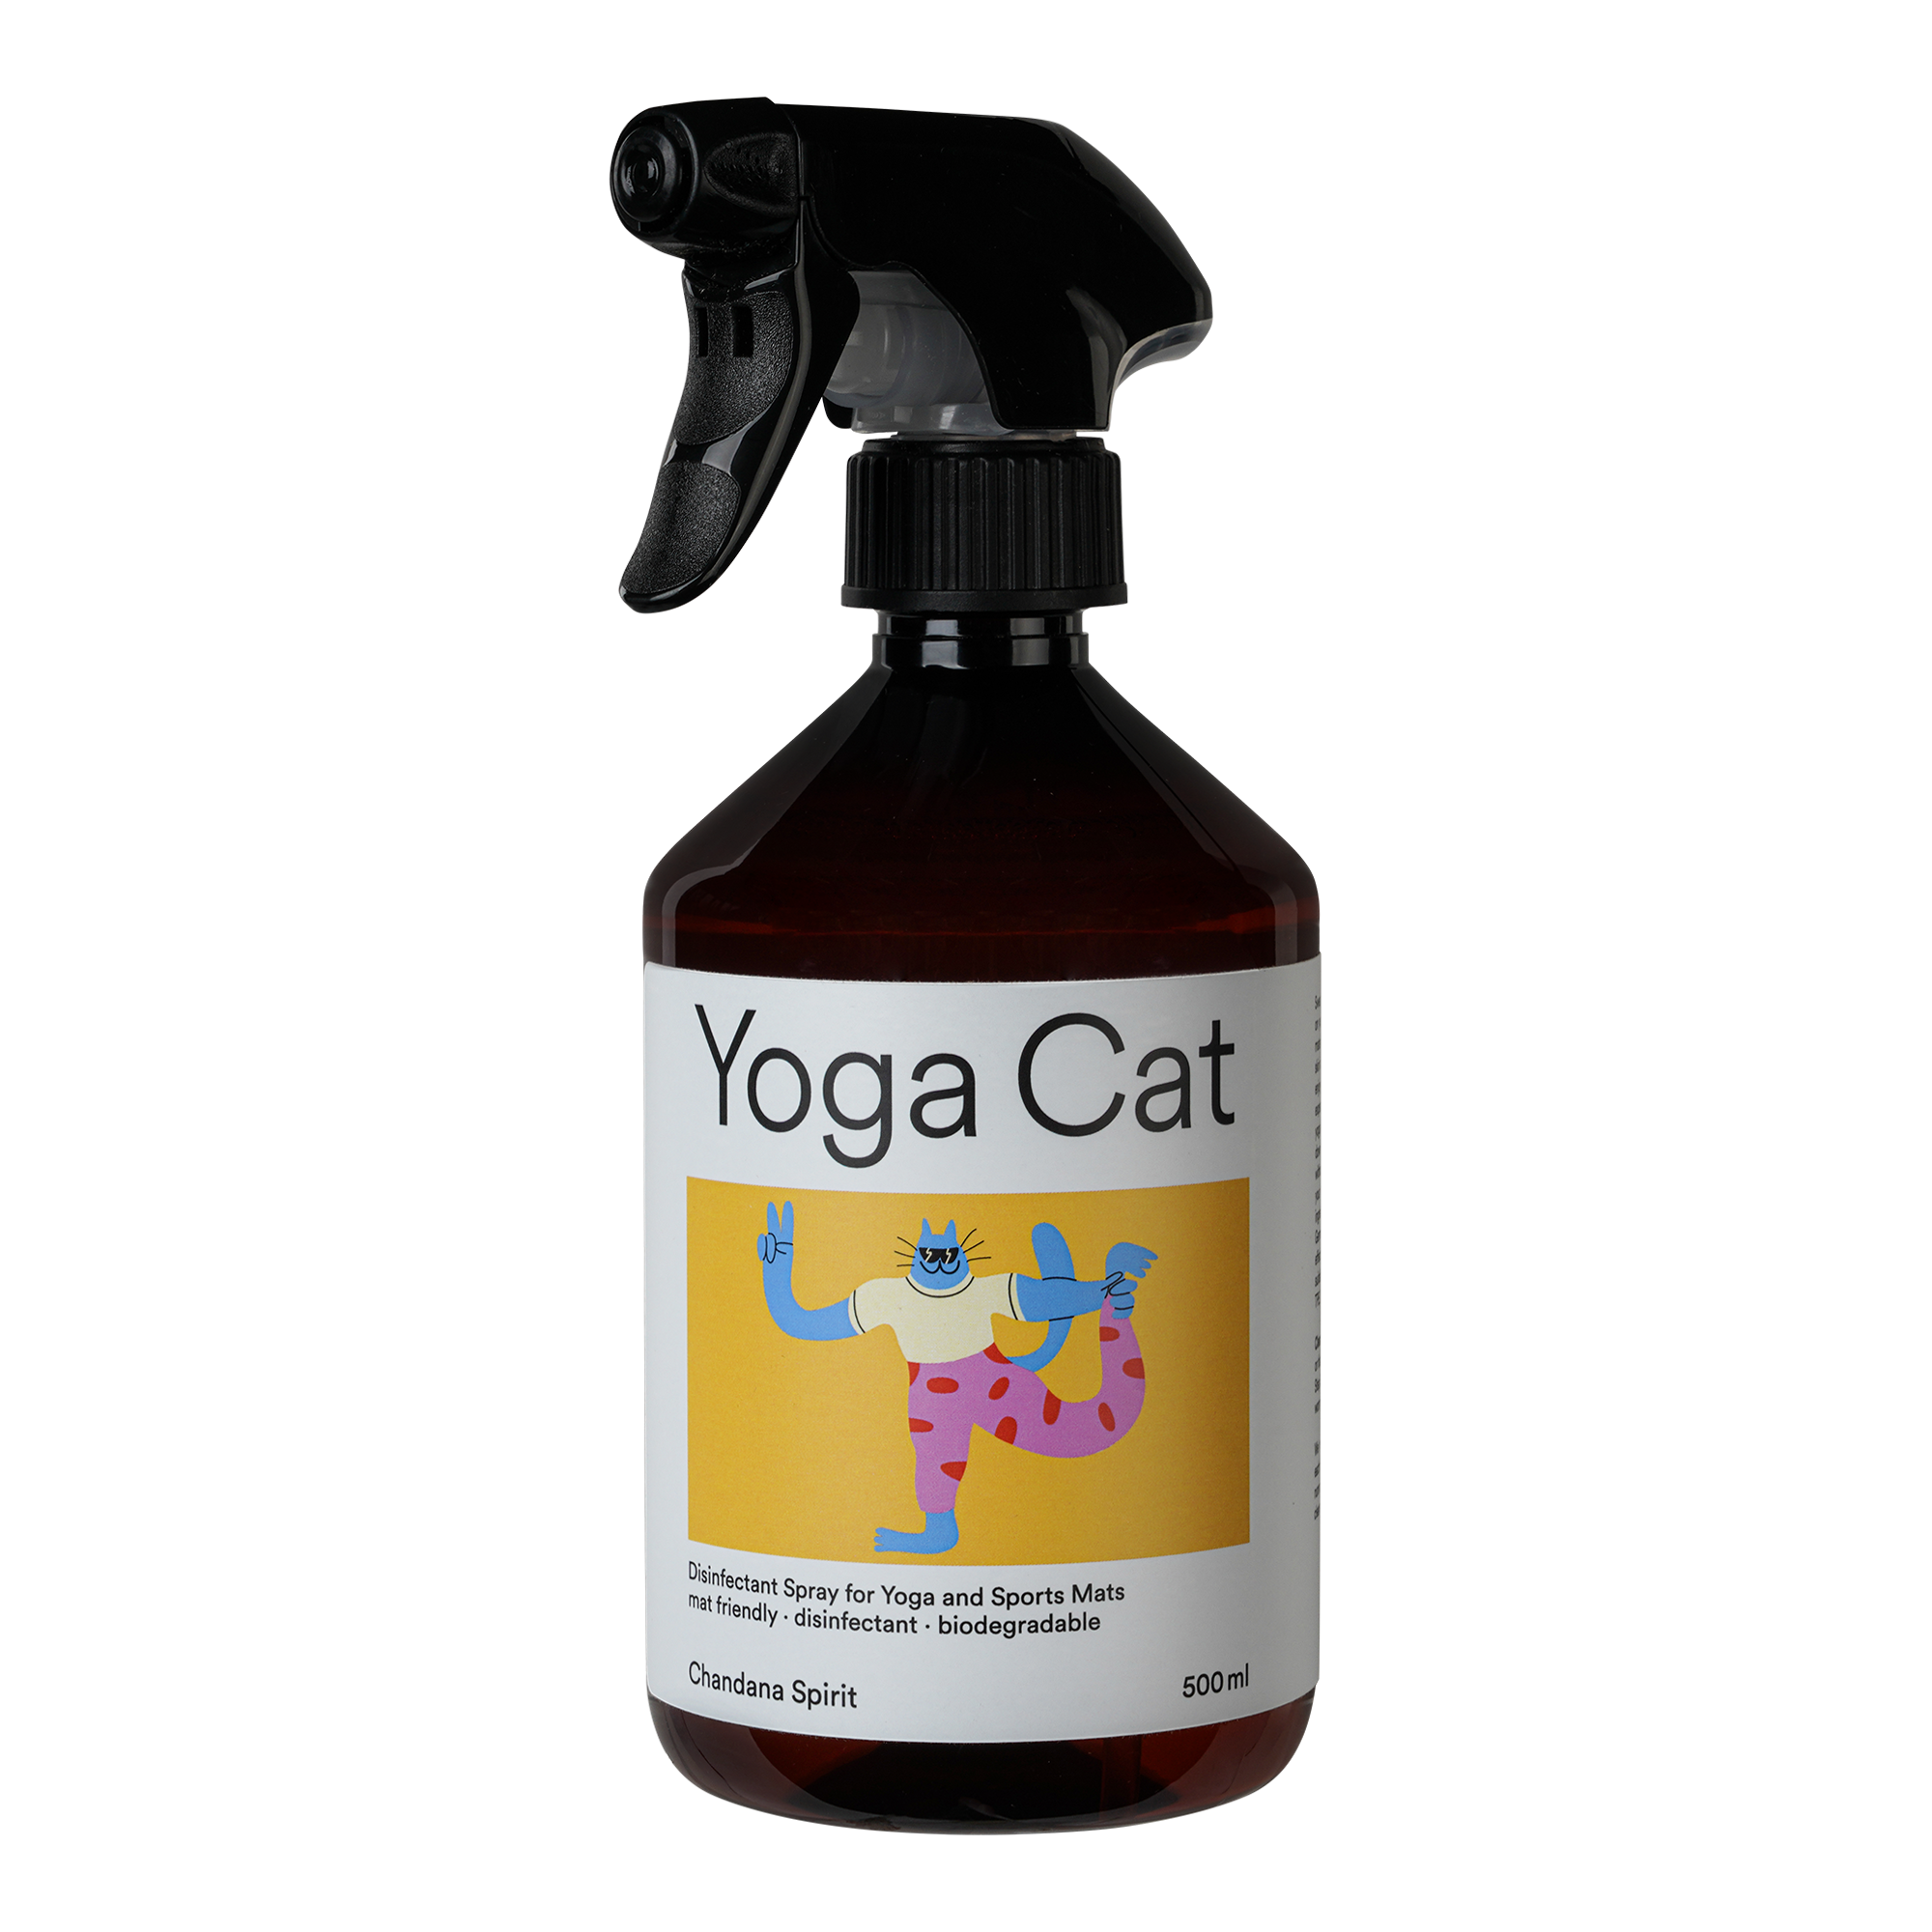 disinfectant spray, yogacat disinfectant, chandana spirit, cleaning spray, natural disinfectant, aromatherapy spray, eco-friendly disinfectant, yoga cleaning supplies